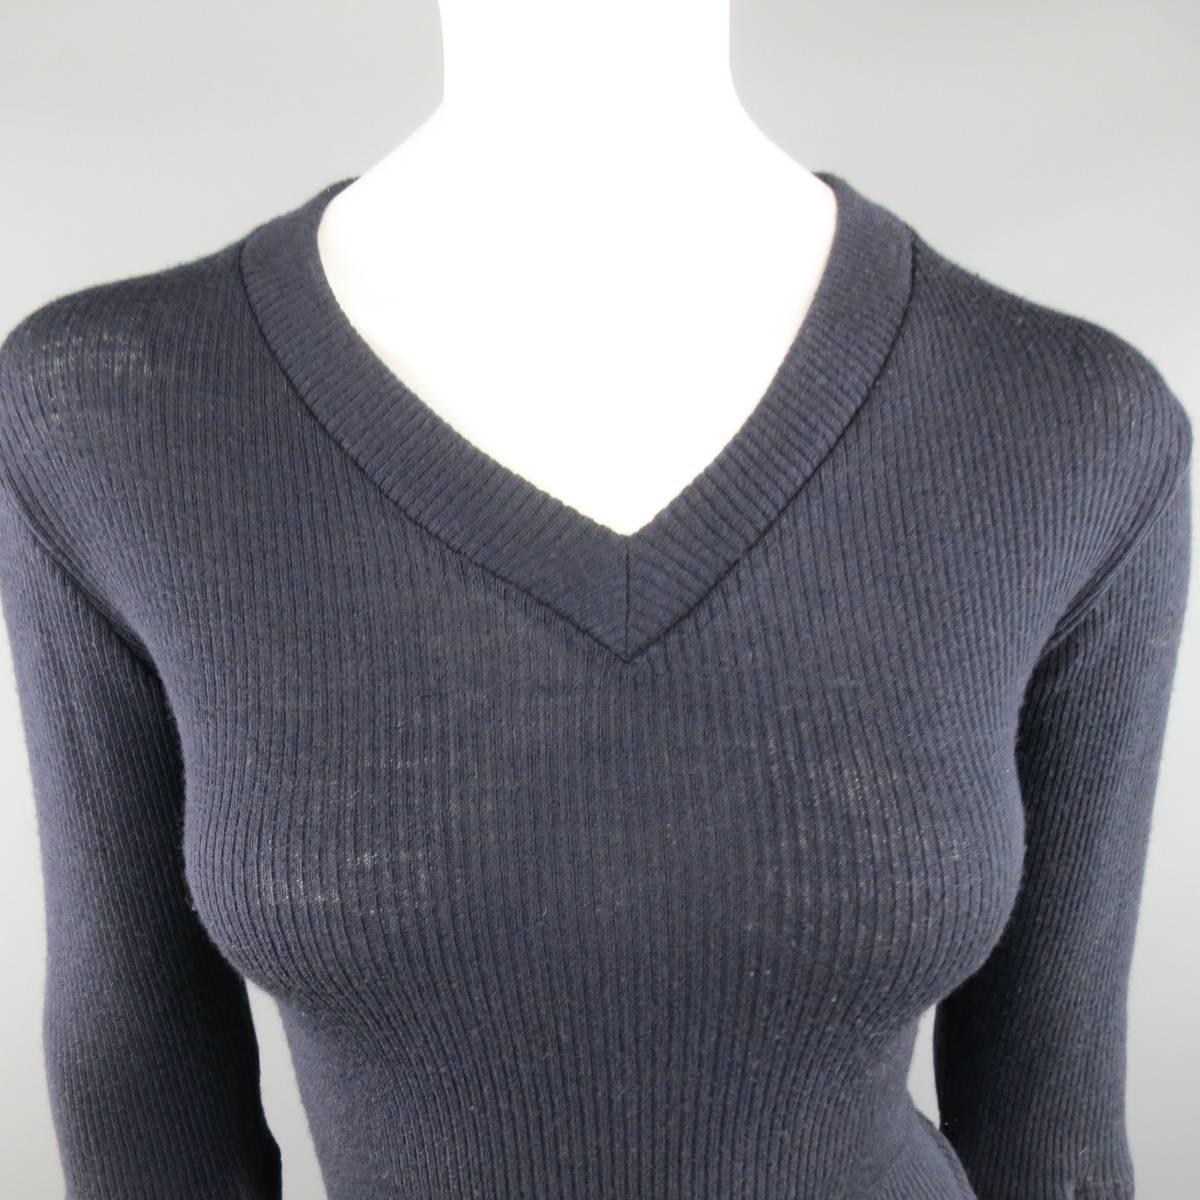 Vintage Y's by Yohji Yamamoto pullover in a sheer navy blue ribbed wool knit featuring a V neckline and extended cuffed sleeves with raw edge olive plaid fabric panels. Minor wear throughout. Made in Japan.
 
Good Pre-Owned Condition.
Marked: JP 3
